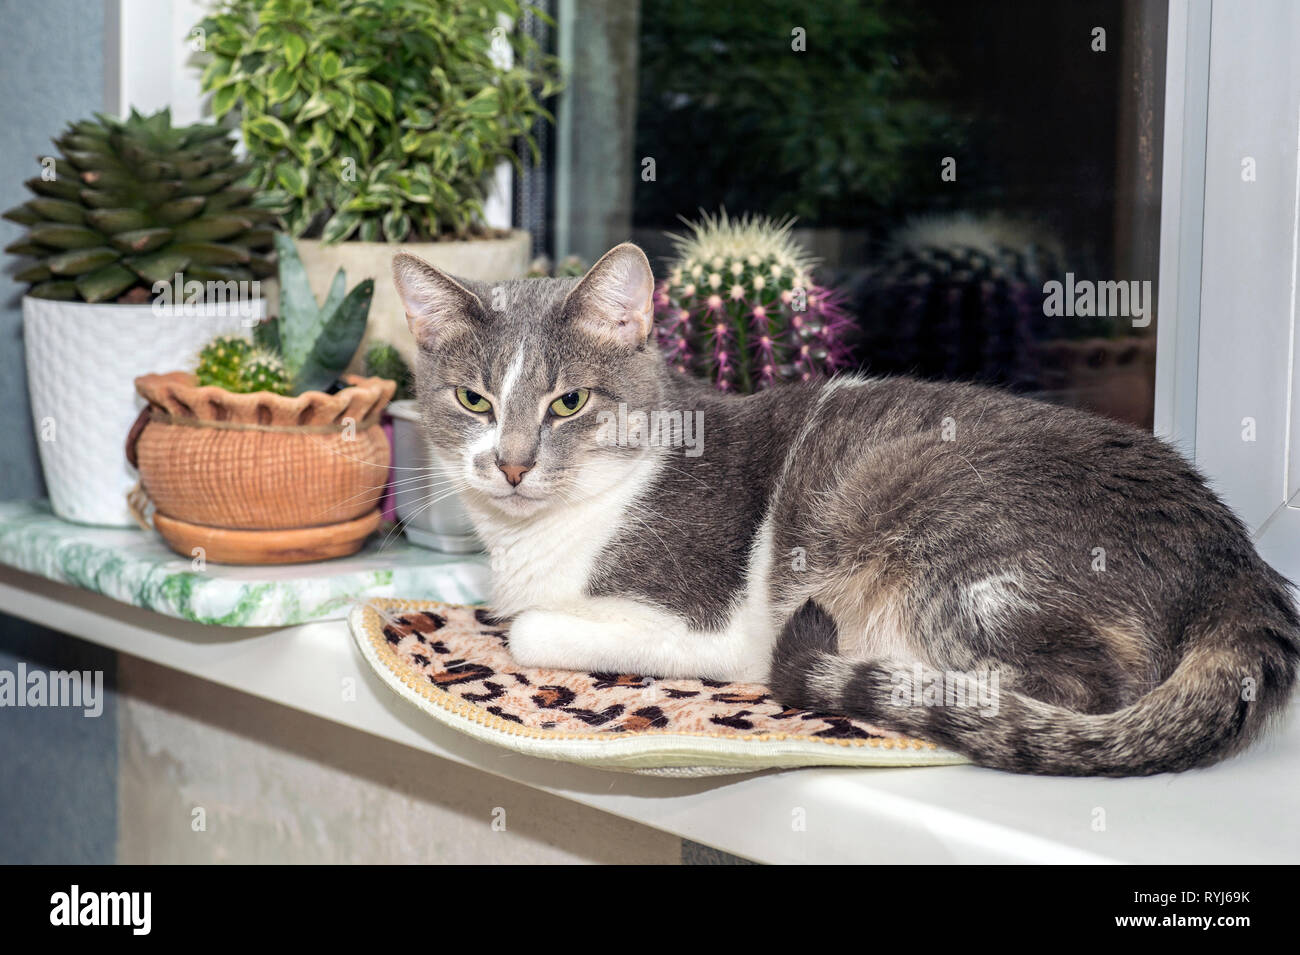 A young grey cat with a striped tail rests on the windowsill against the cacti in thoughtfulness. Stock Photo